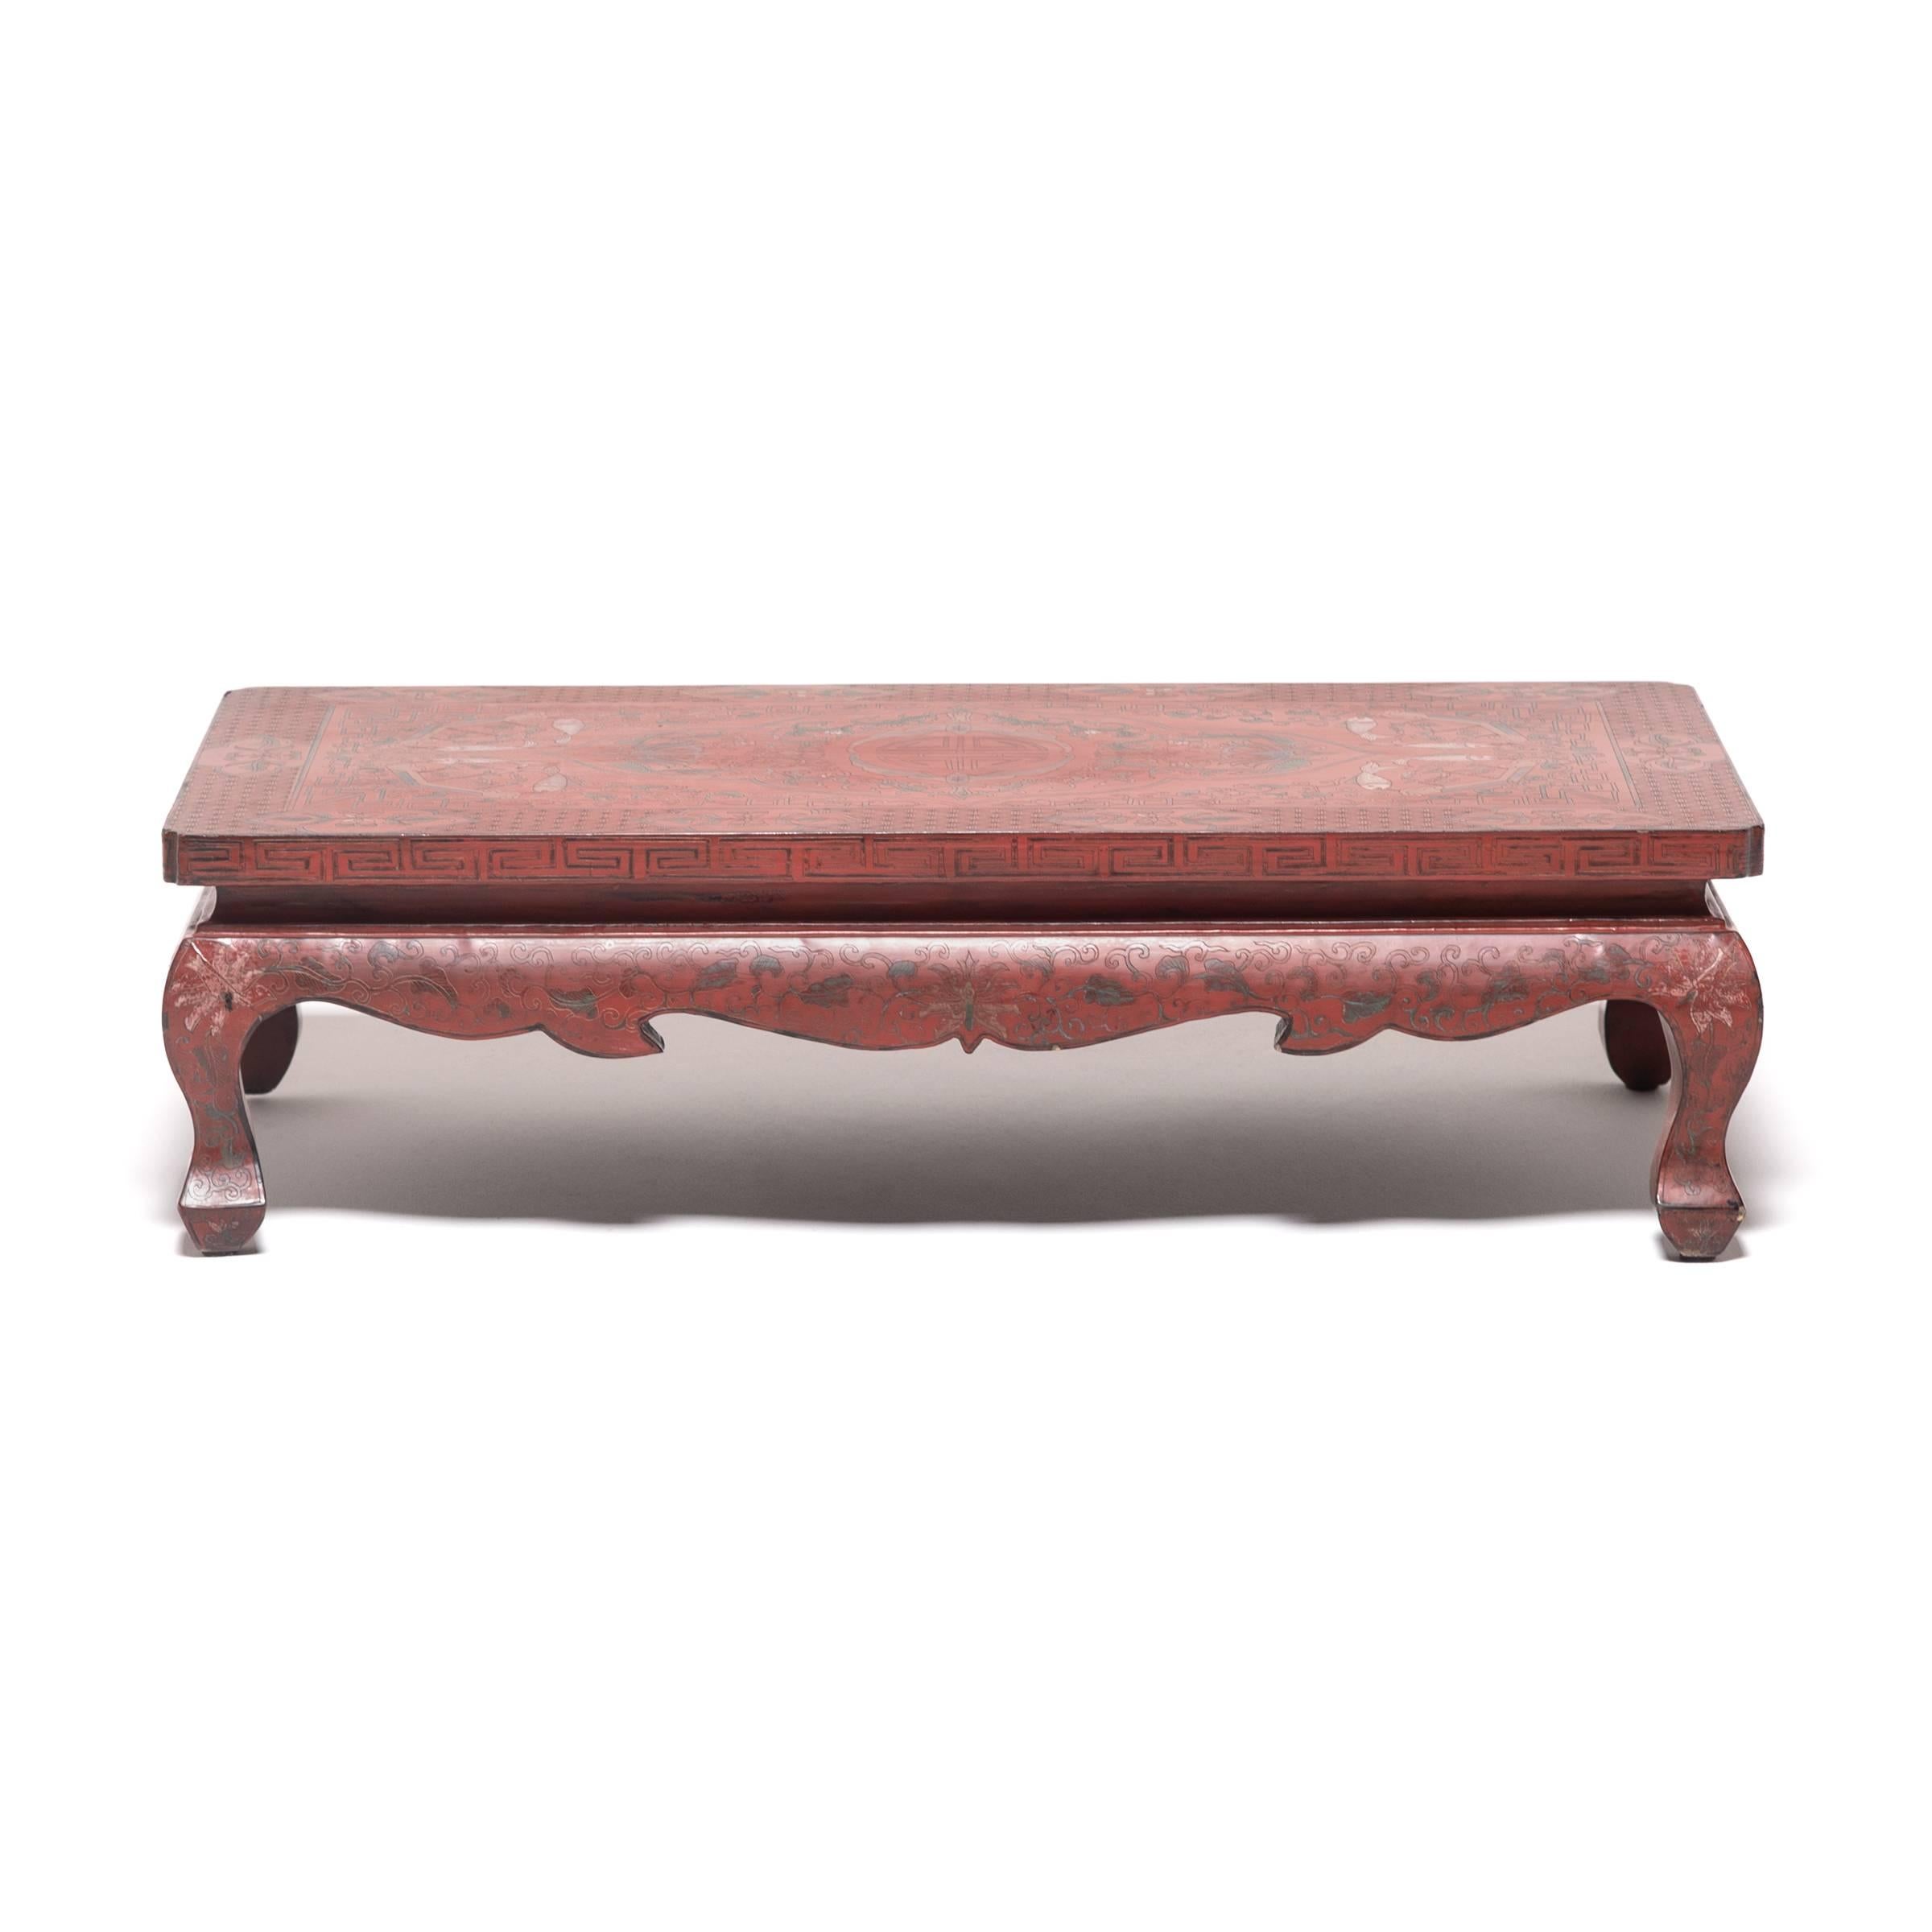 Qing Chinese Low Painted Lacquer Table with Fish Chimes, c. 1900 For Sale